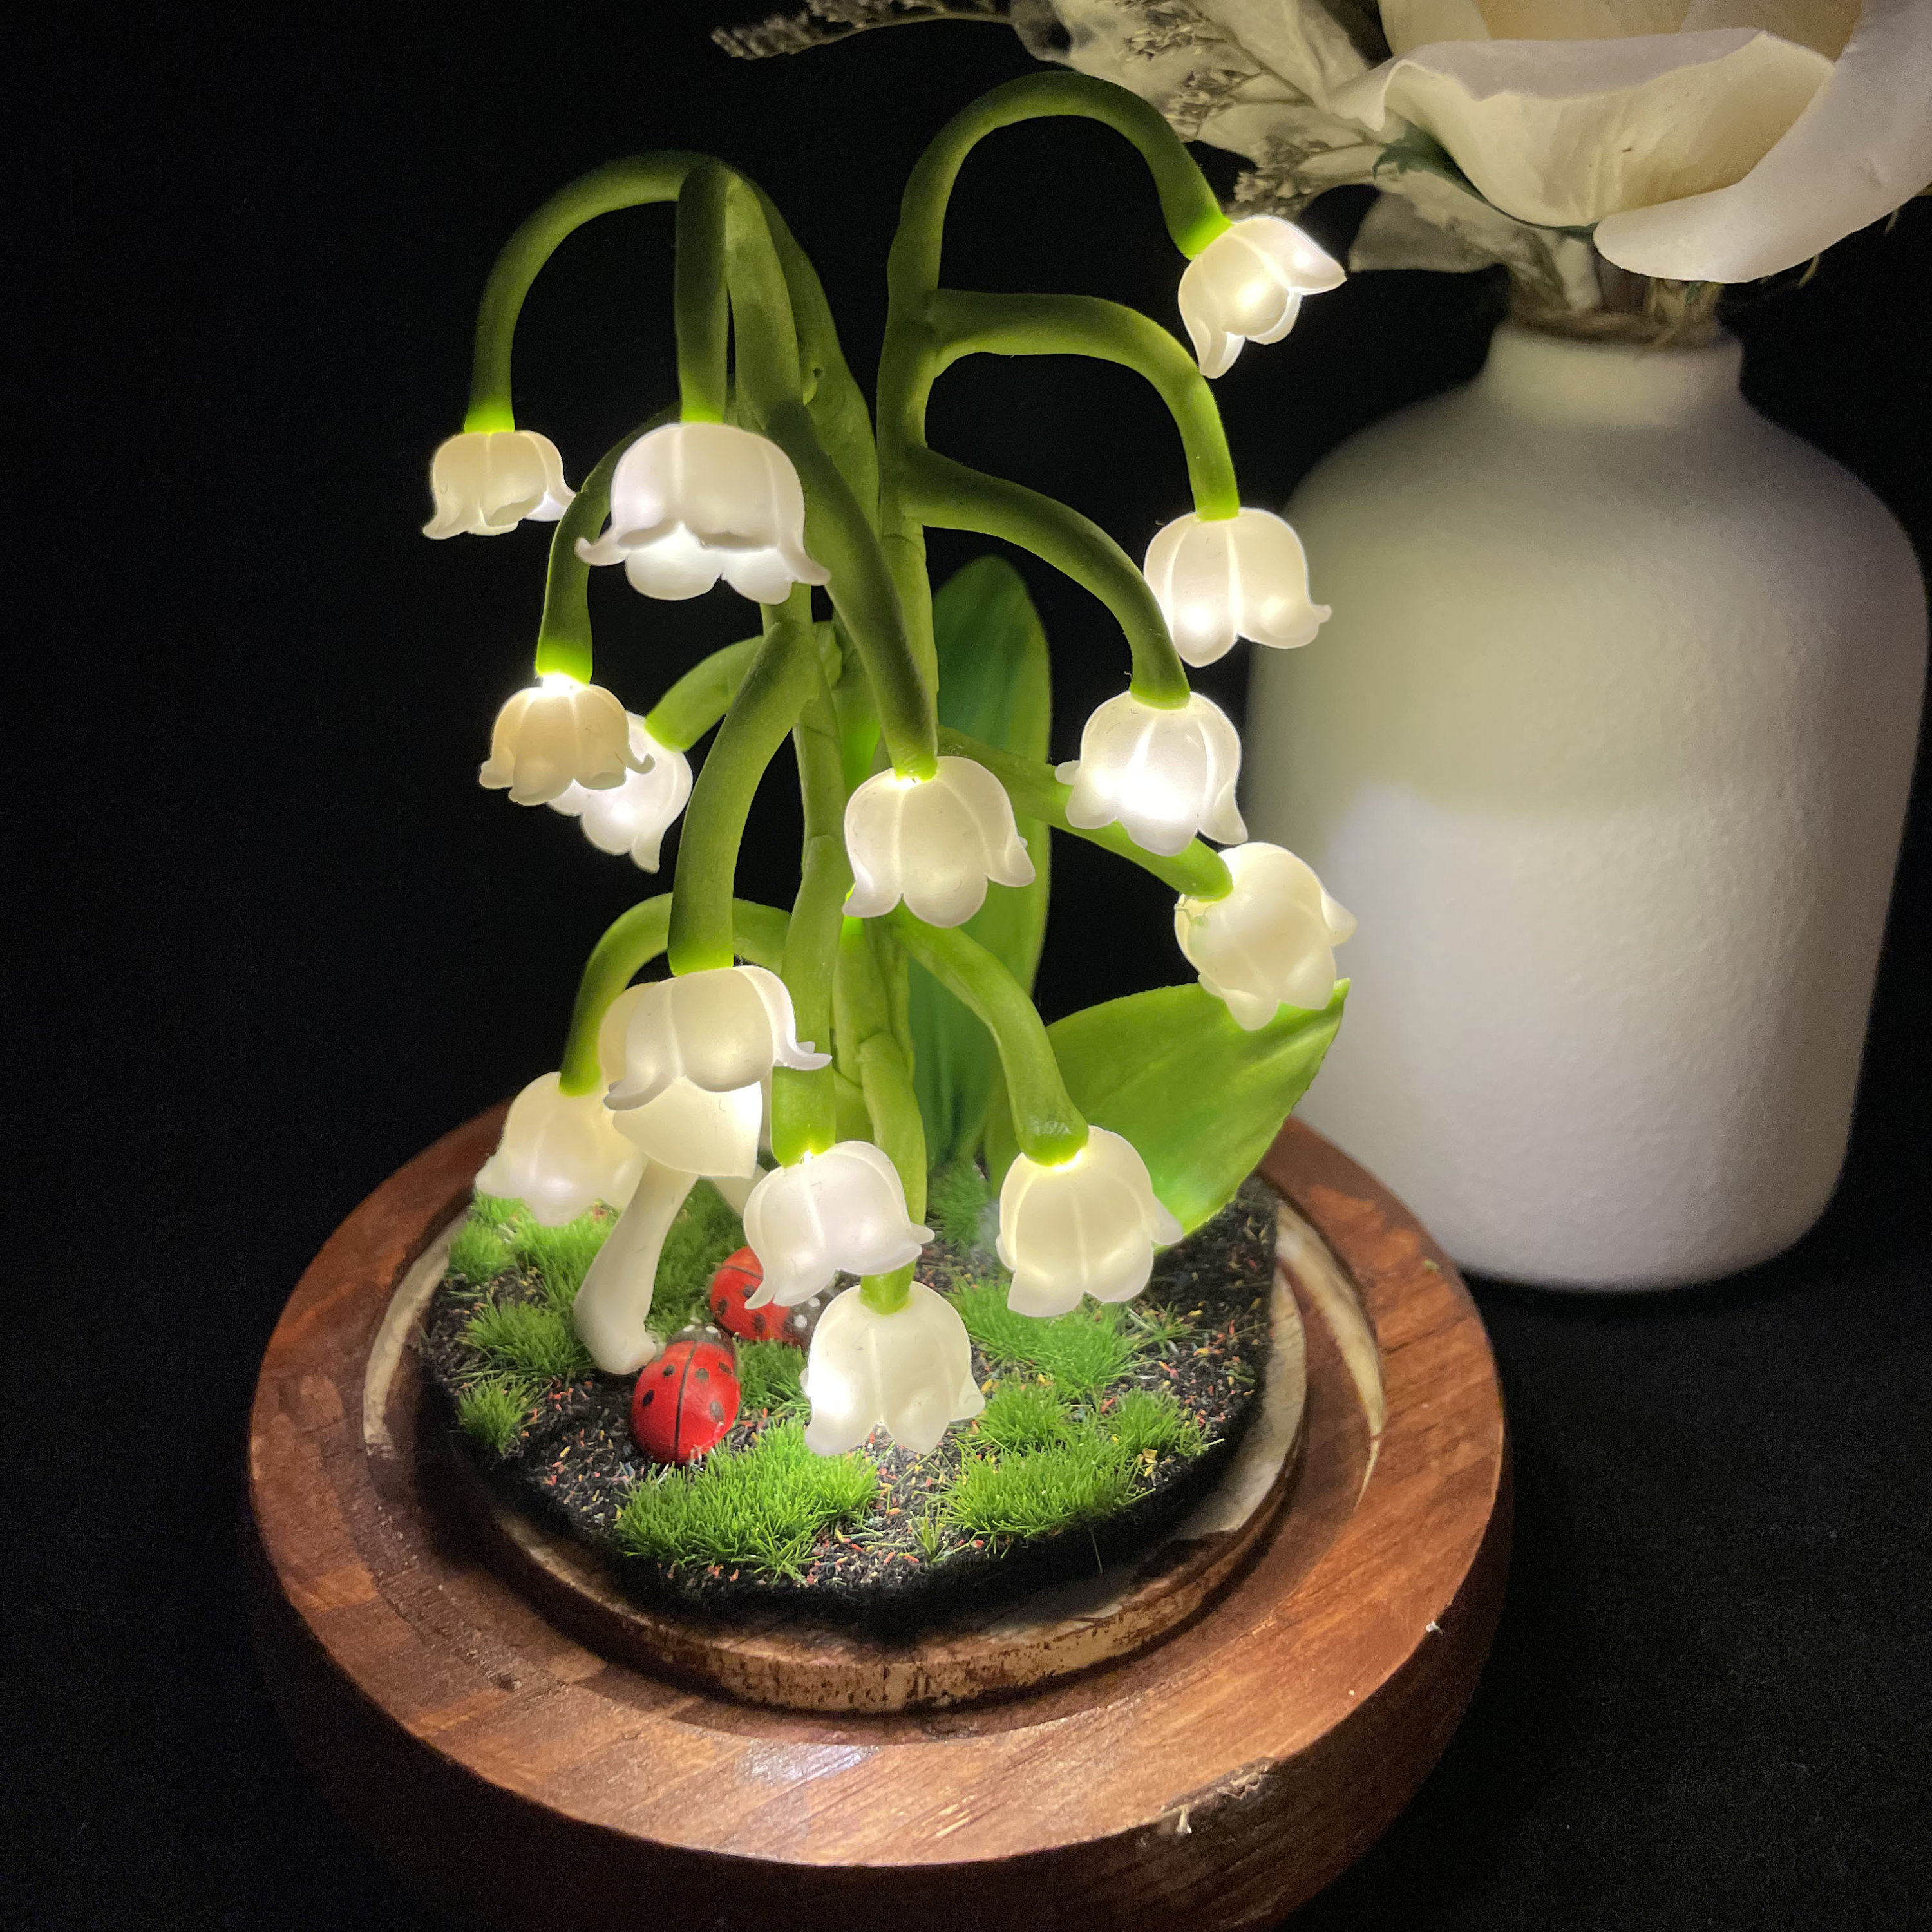  Sofyee Original Lily of The Valley Lamp/Beautiful